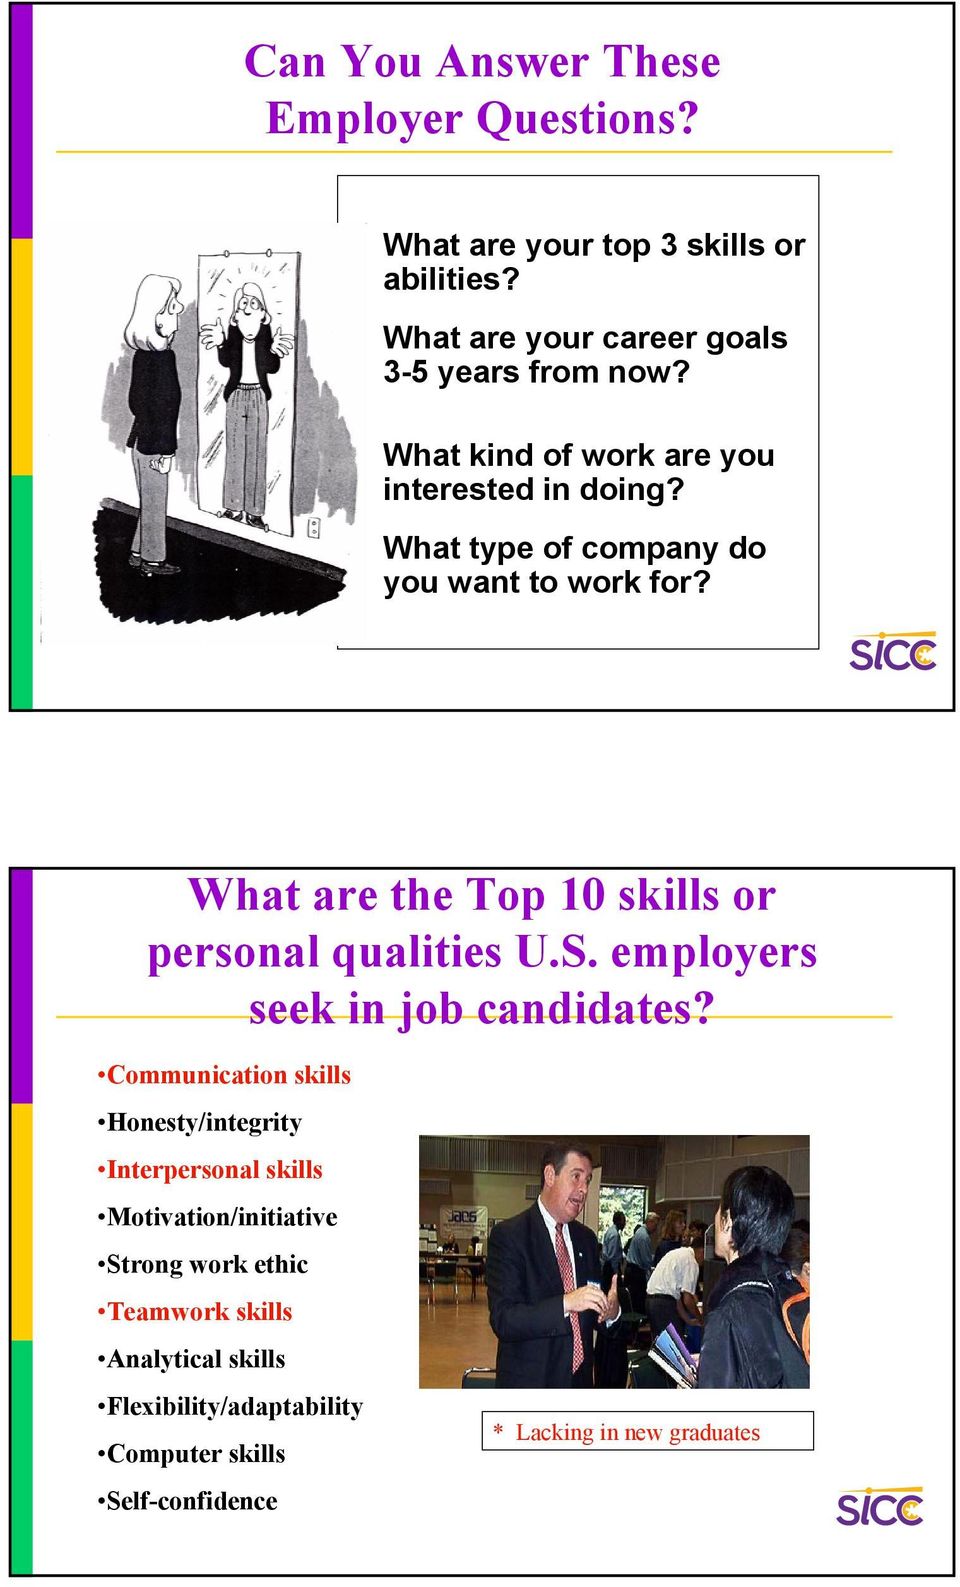 What are the Top 10 skills or personal qualities U.S. employers seek in job candidates?